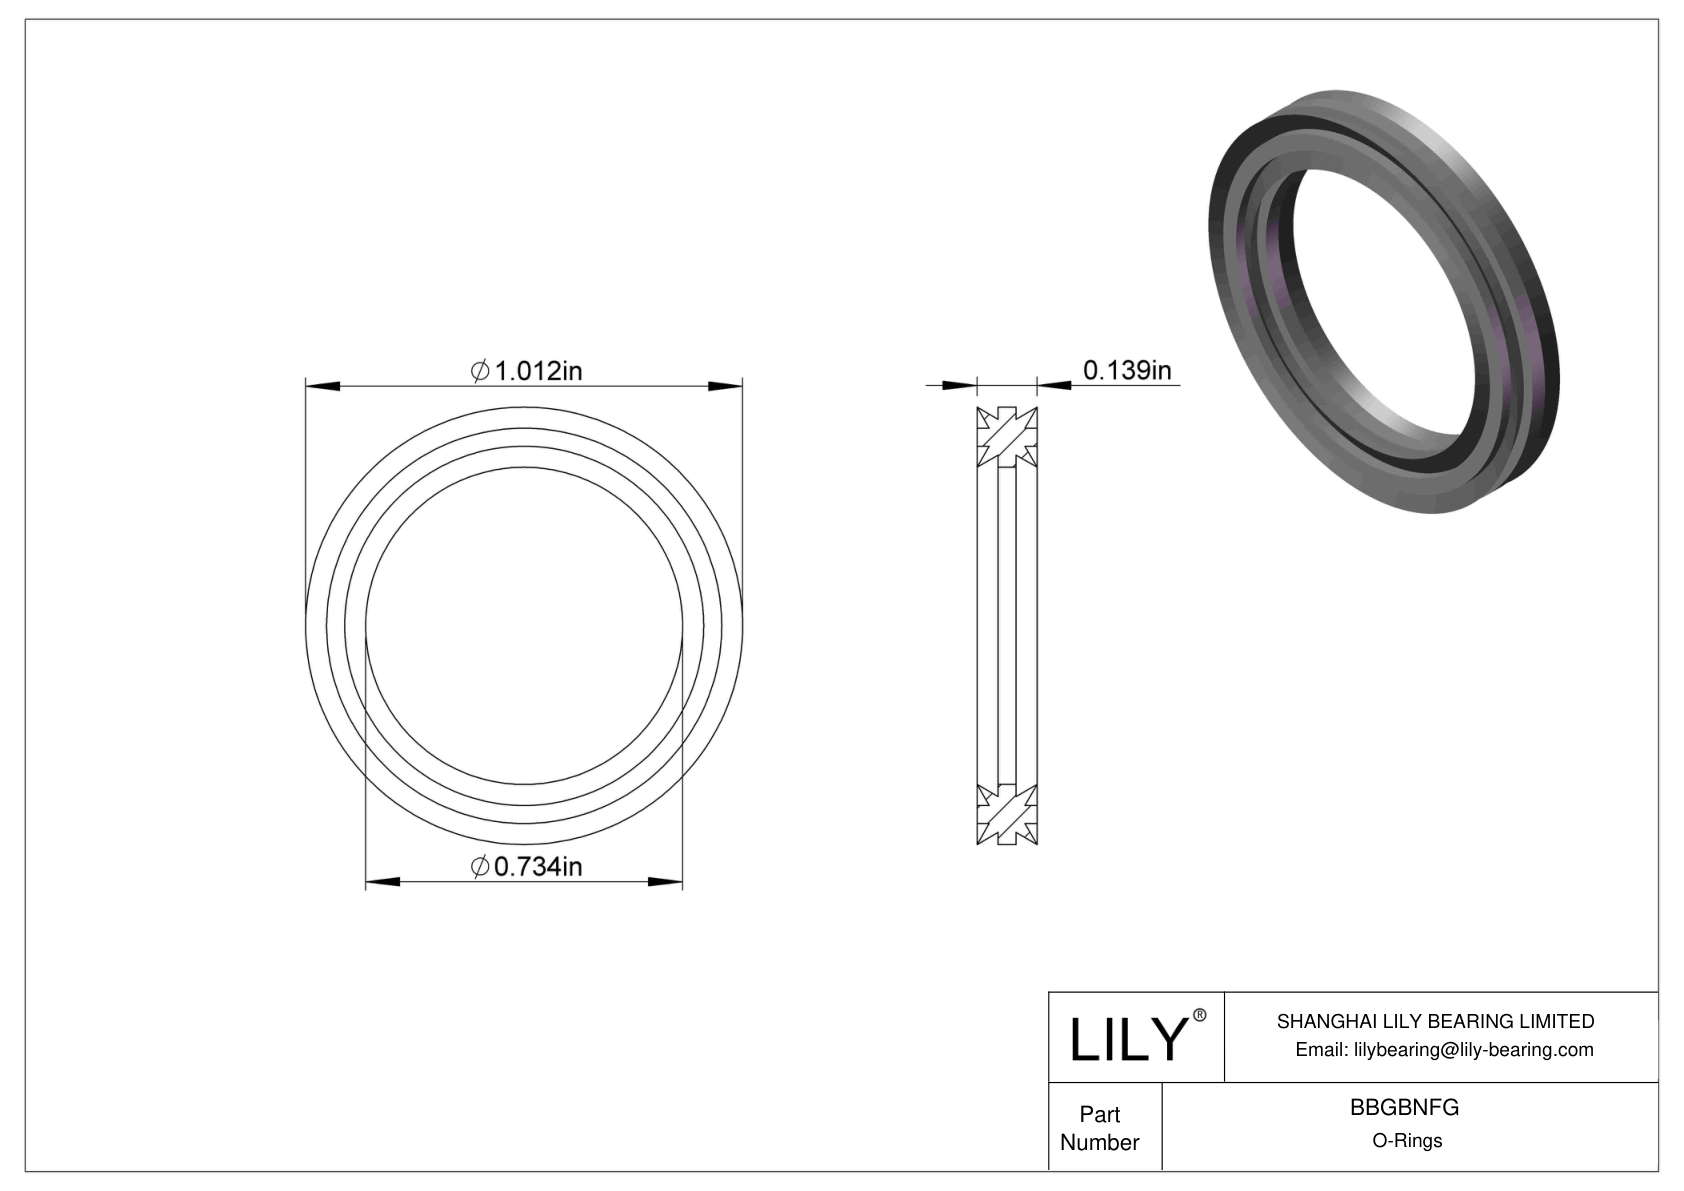 BBGBNFG Oil Resistant O-Rings Double X cad drawing